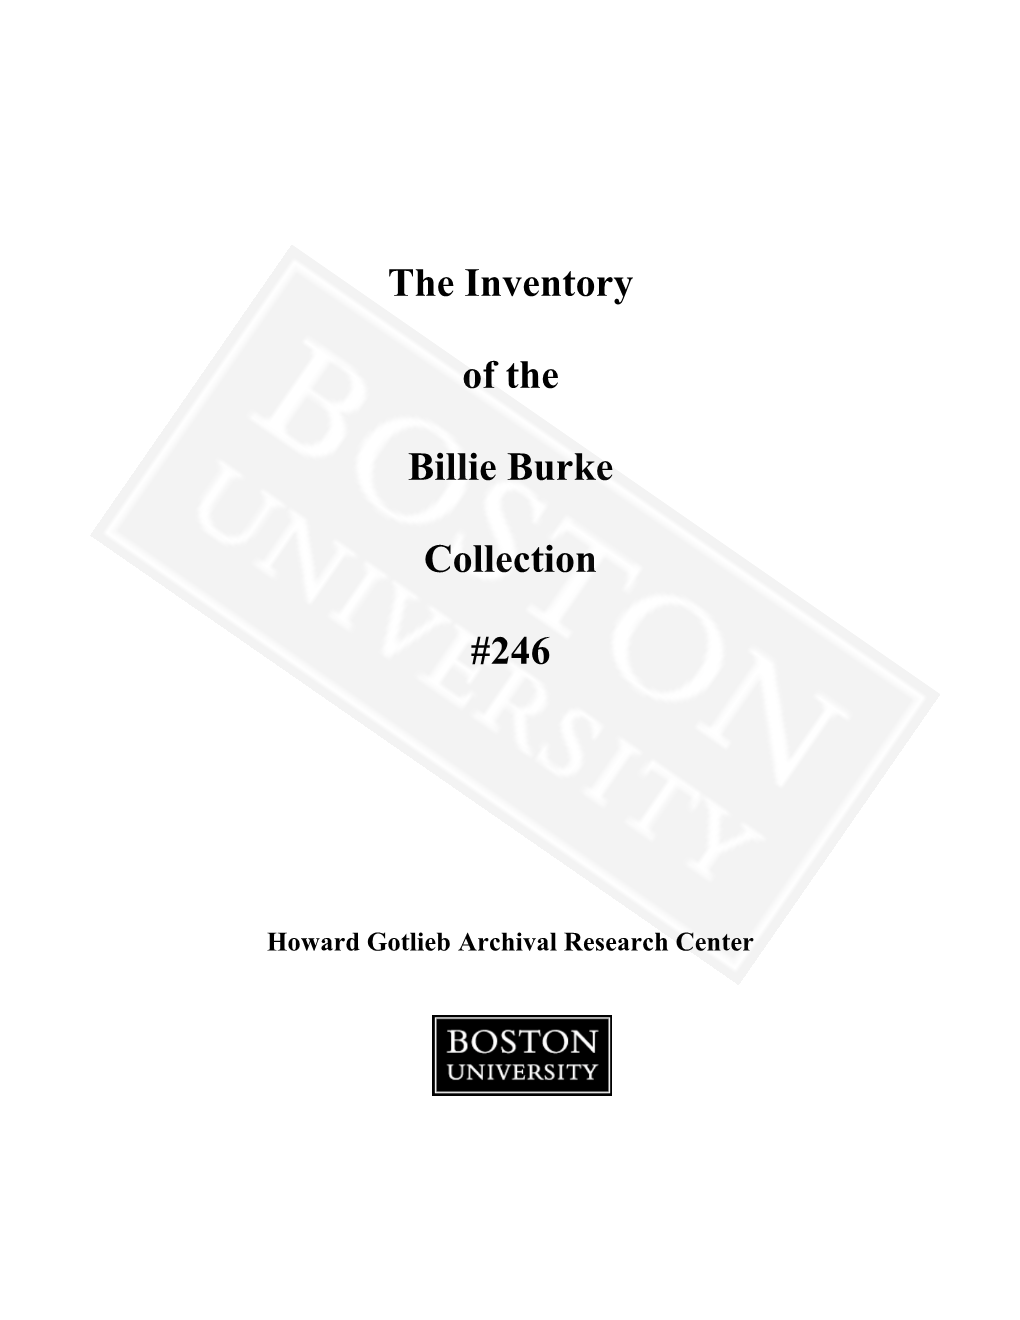 The Inventory of the Billie Burke Collection #246